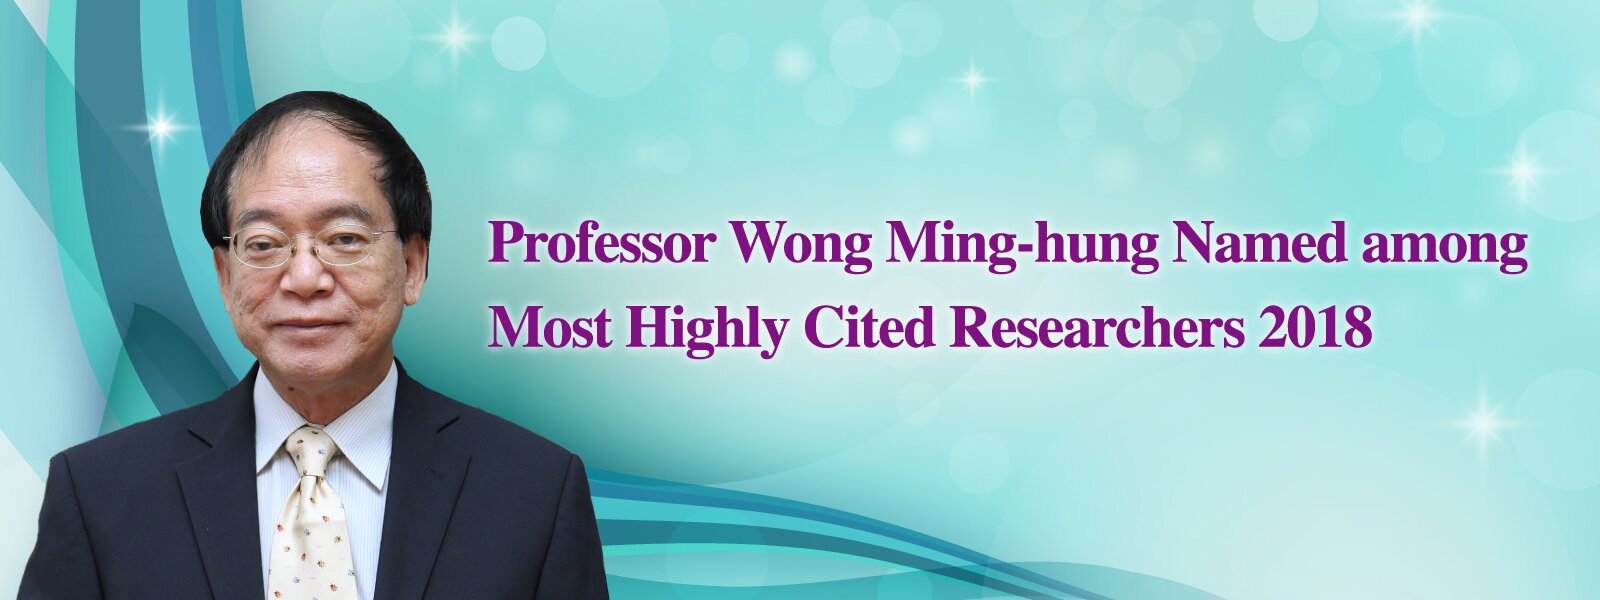 Professor Wong Ming-hung Named among Most Highly Cited Researchers 2018